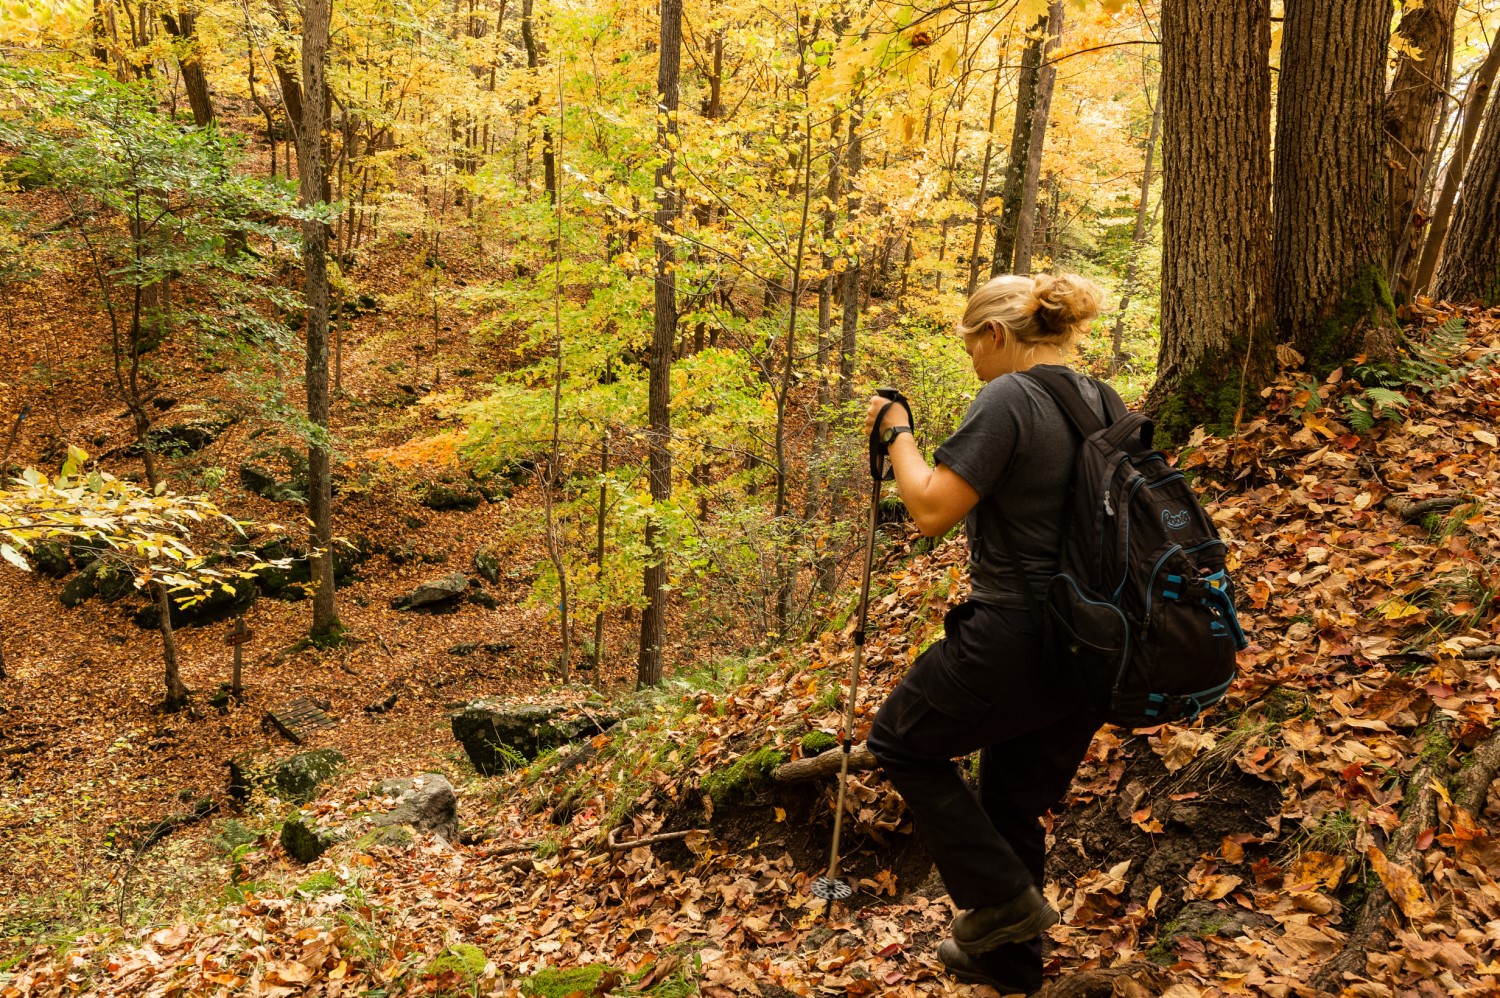 A person using hiking poles and hiking into a forest. The forest floor is covered with fallen leaves and the trees' leaves have turned yellow with the change of the seasons.